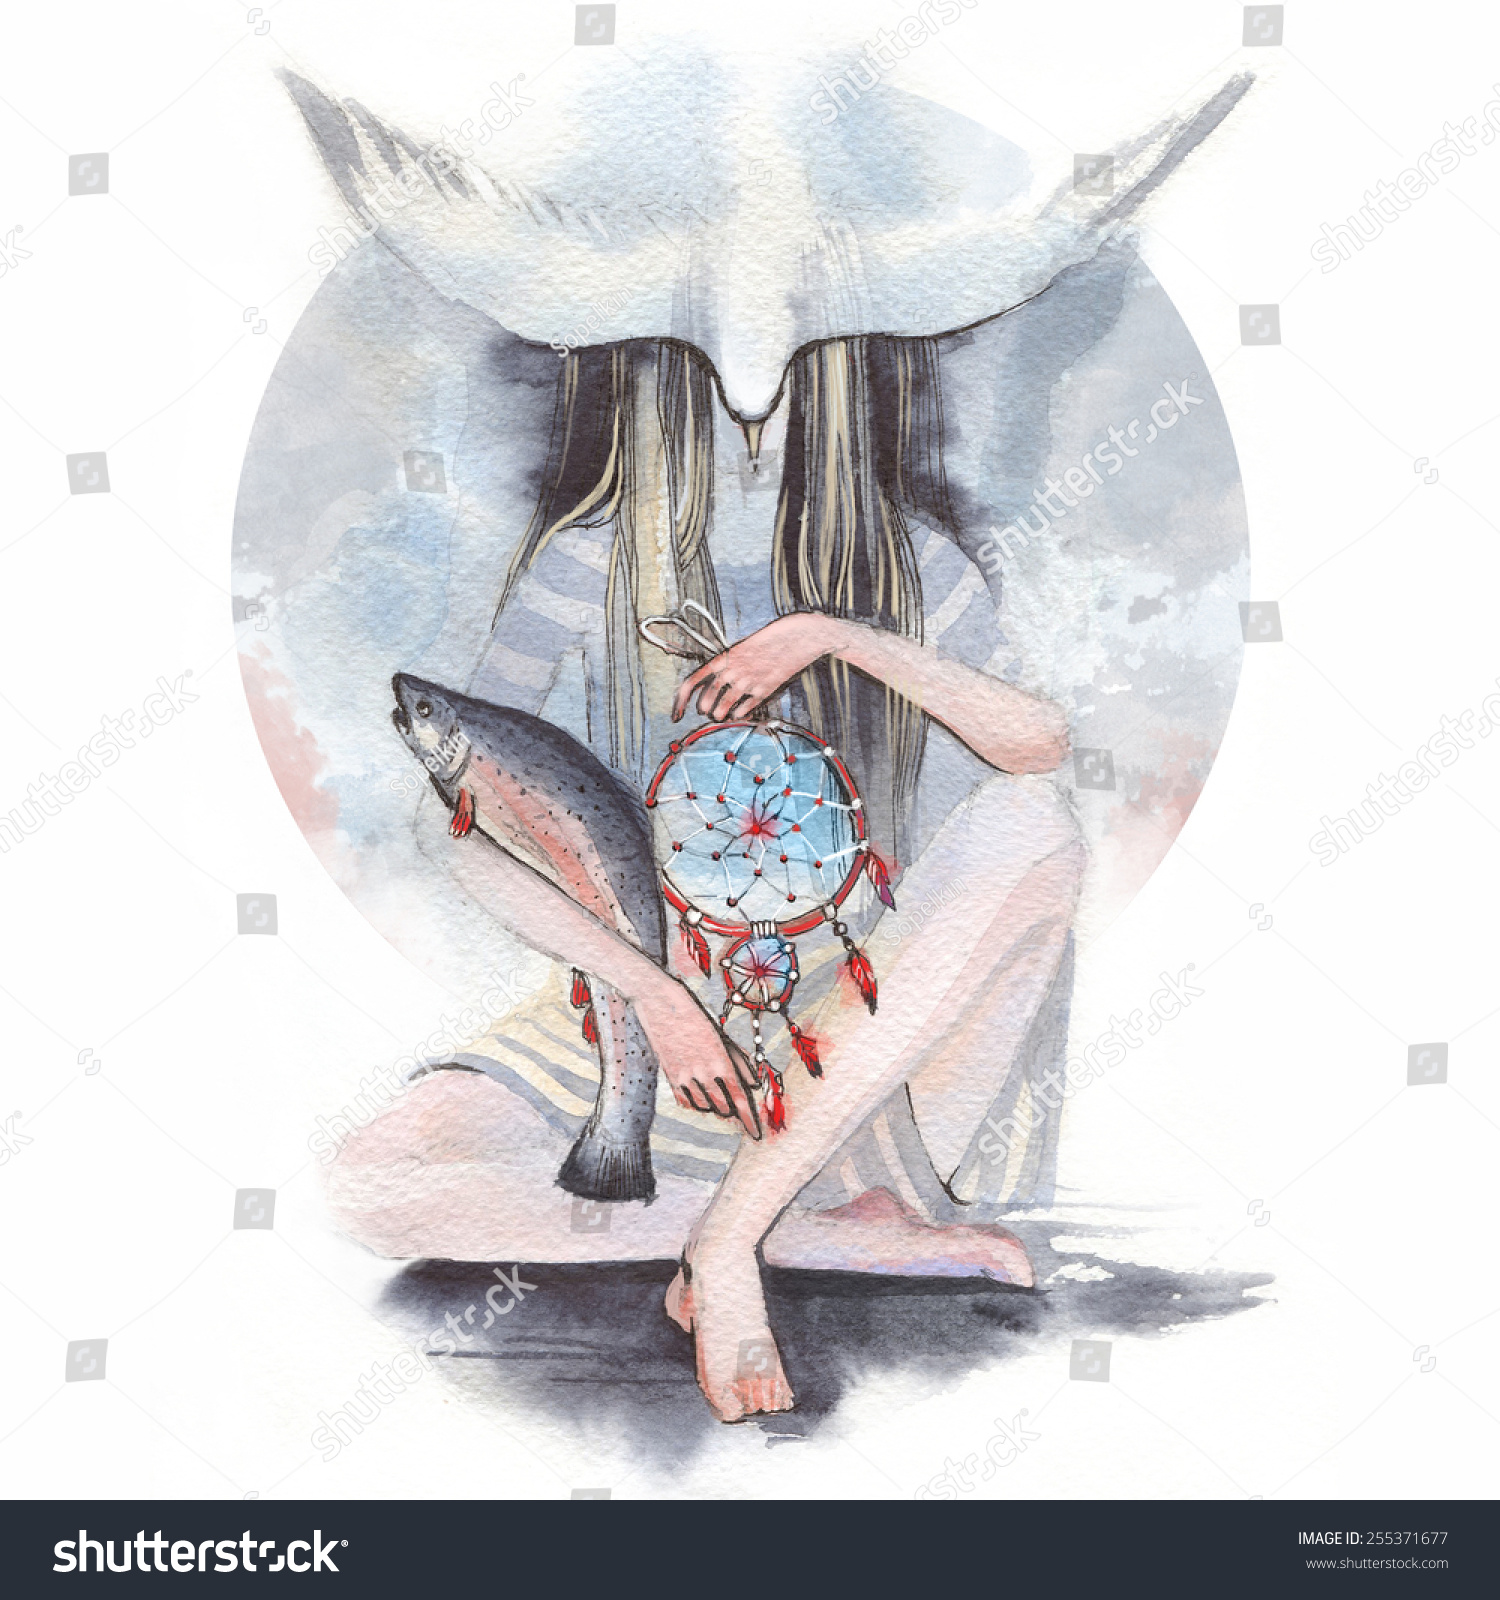 Allegory Dreams Concept Art Watercolor Painting Stock Illustration ...